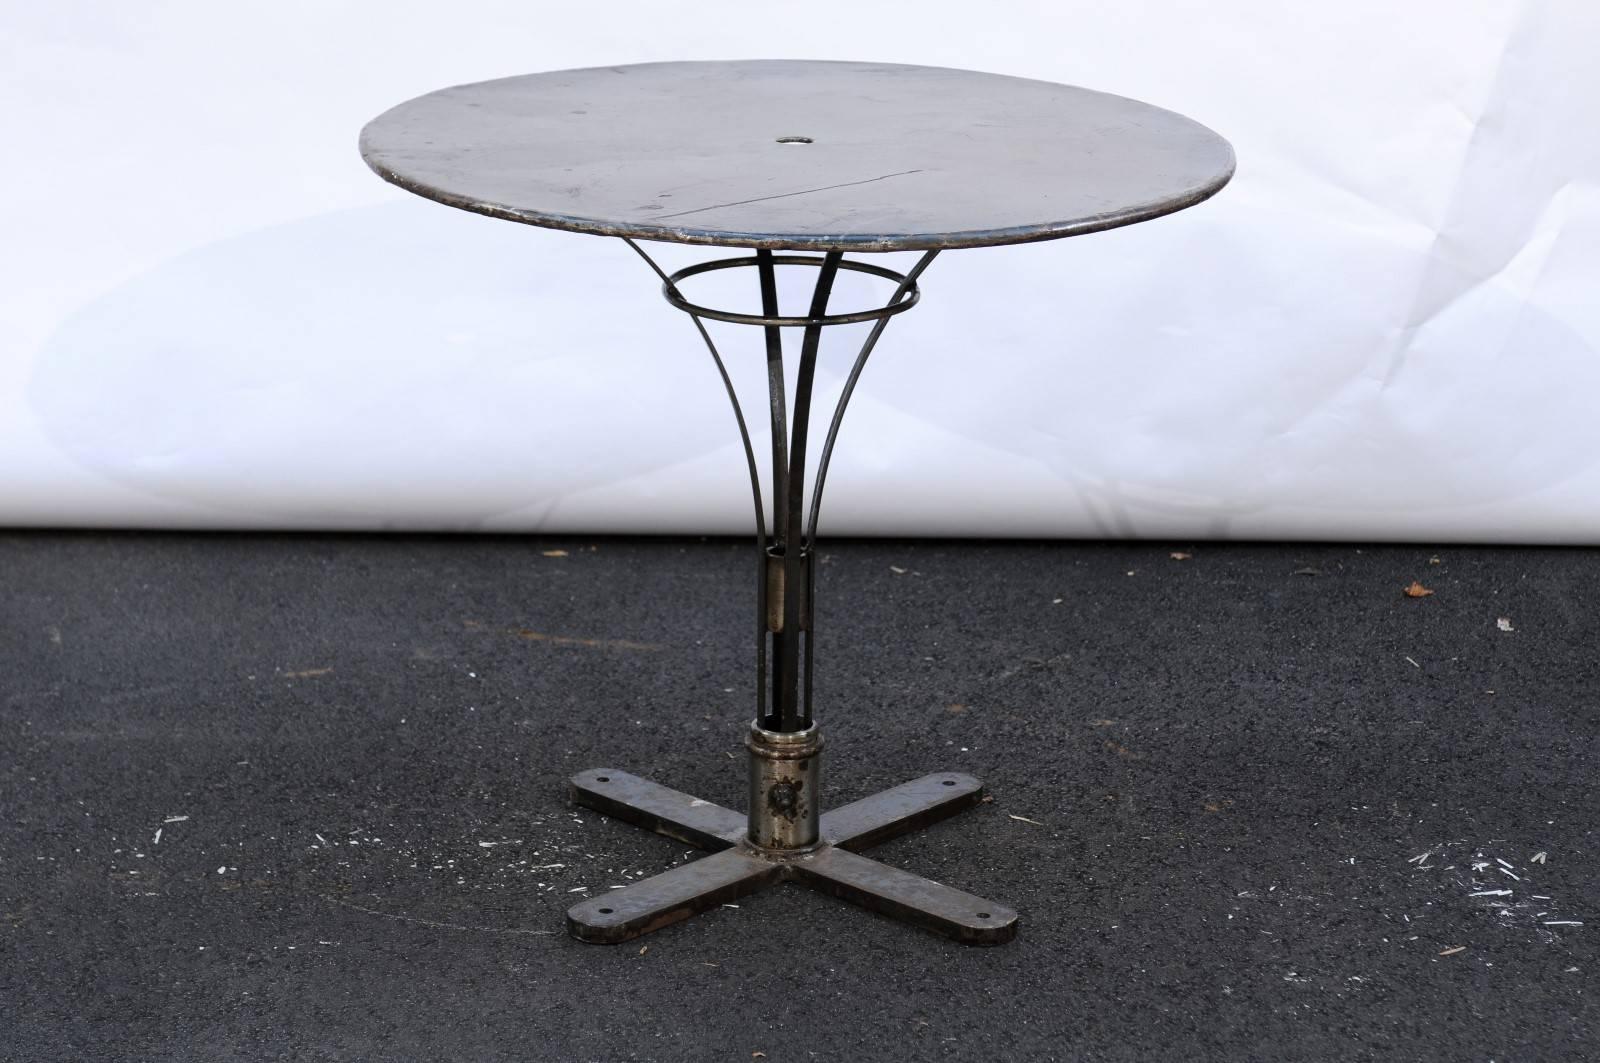 French Vintage Round Iron Bistrot Table from the Loire Valley with Pedestal Base 1